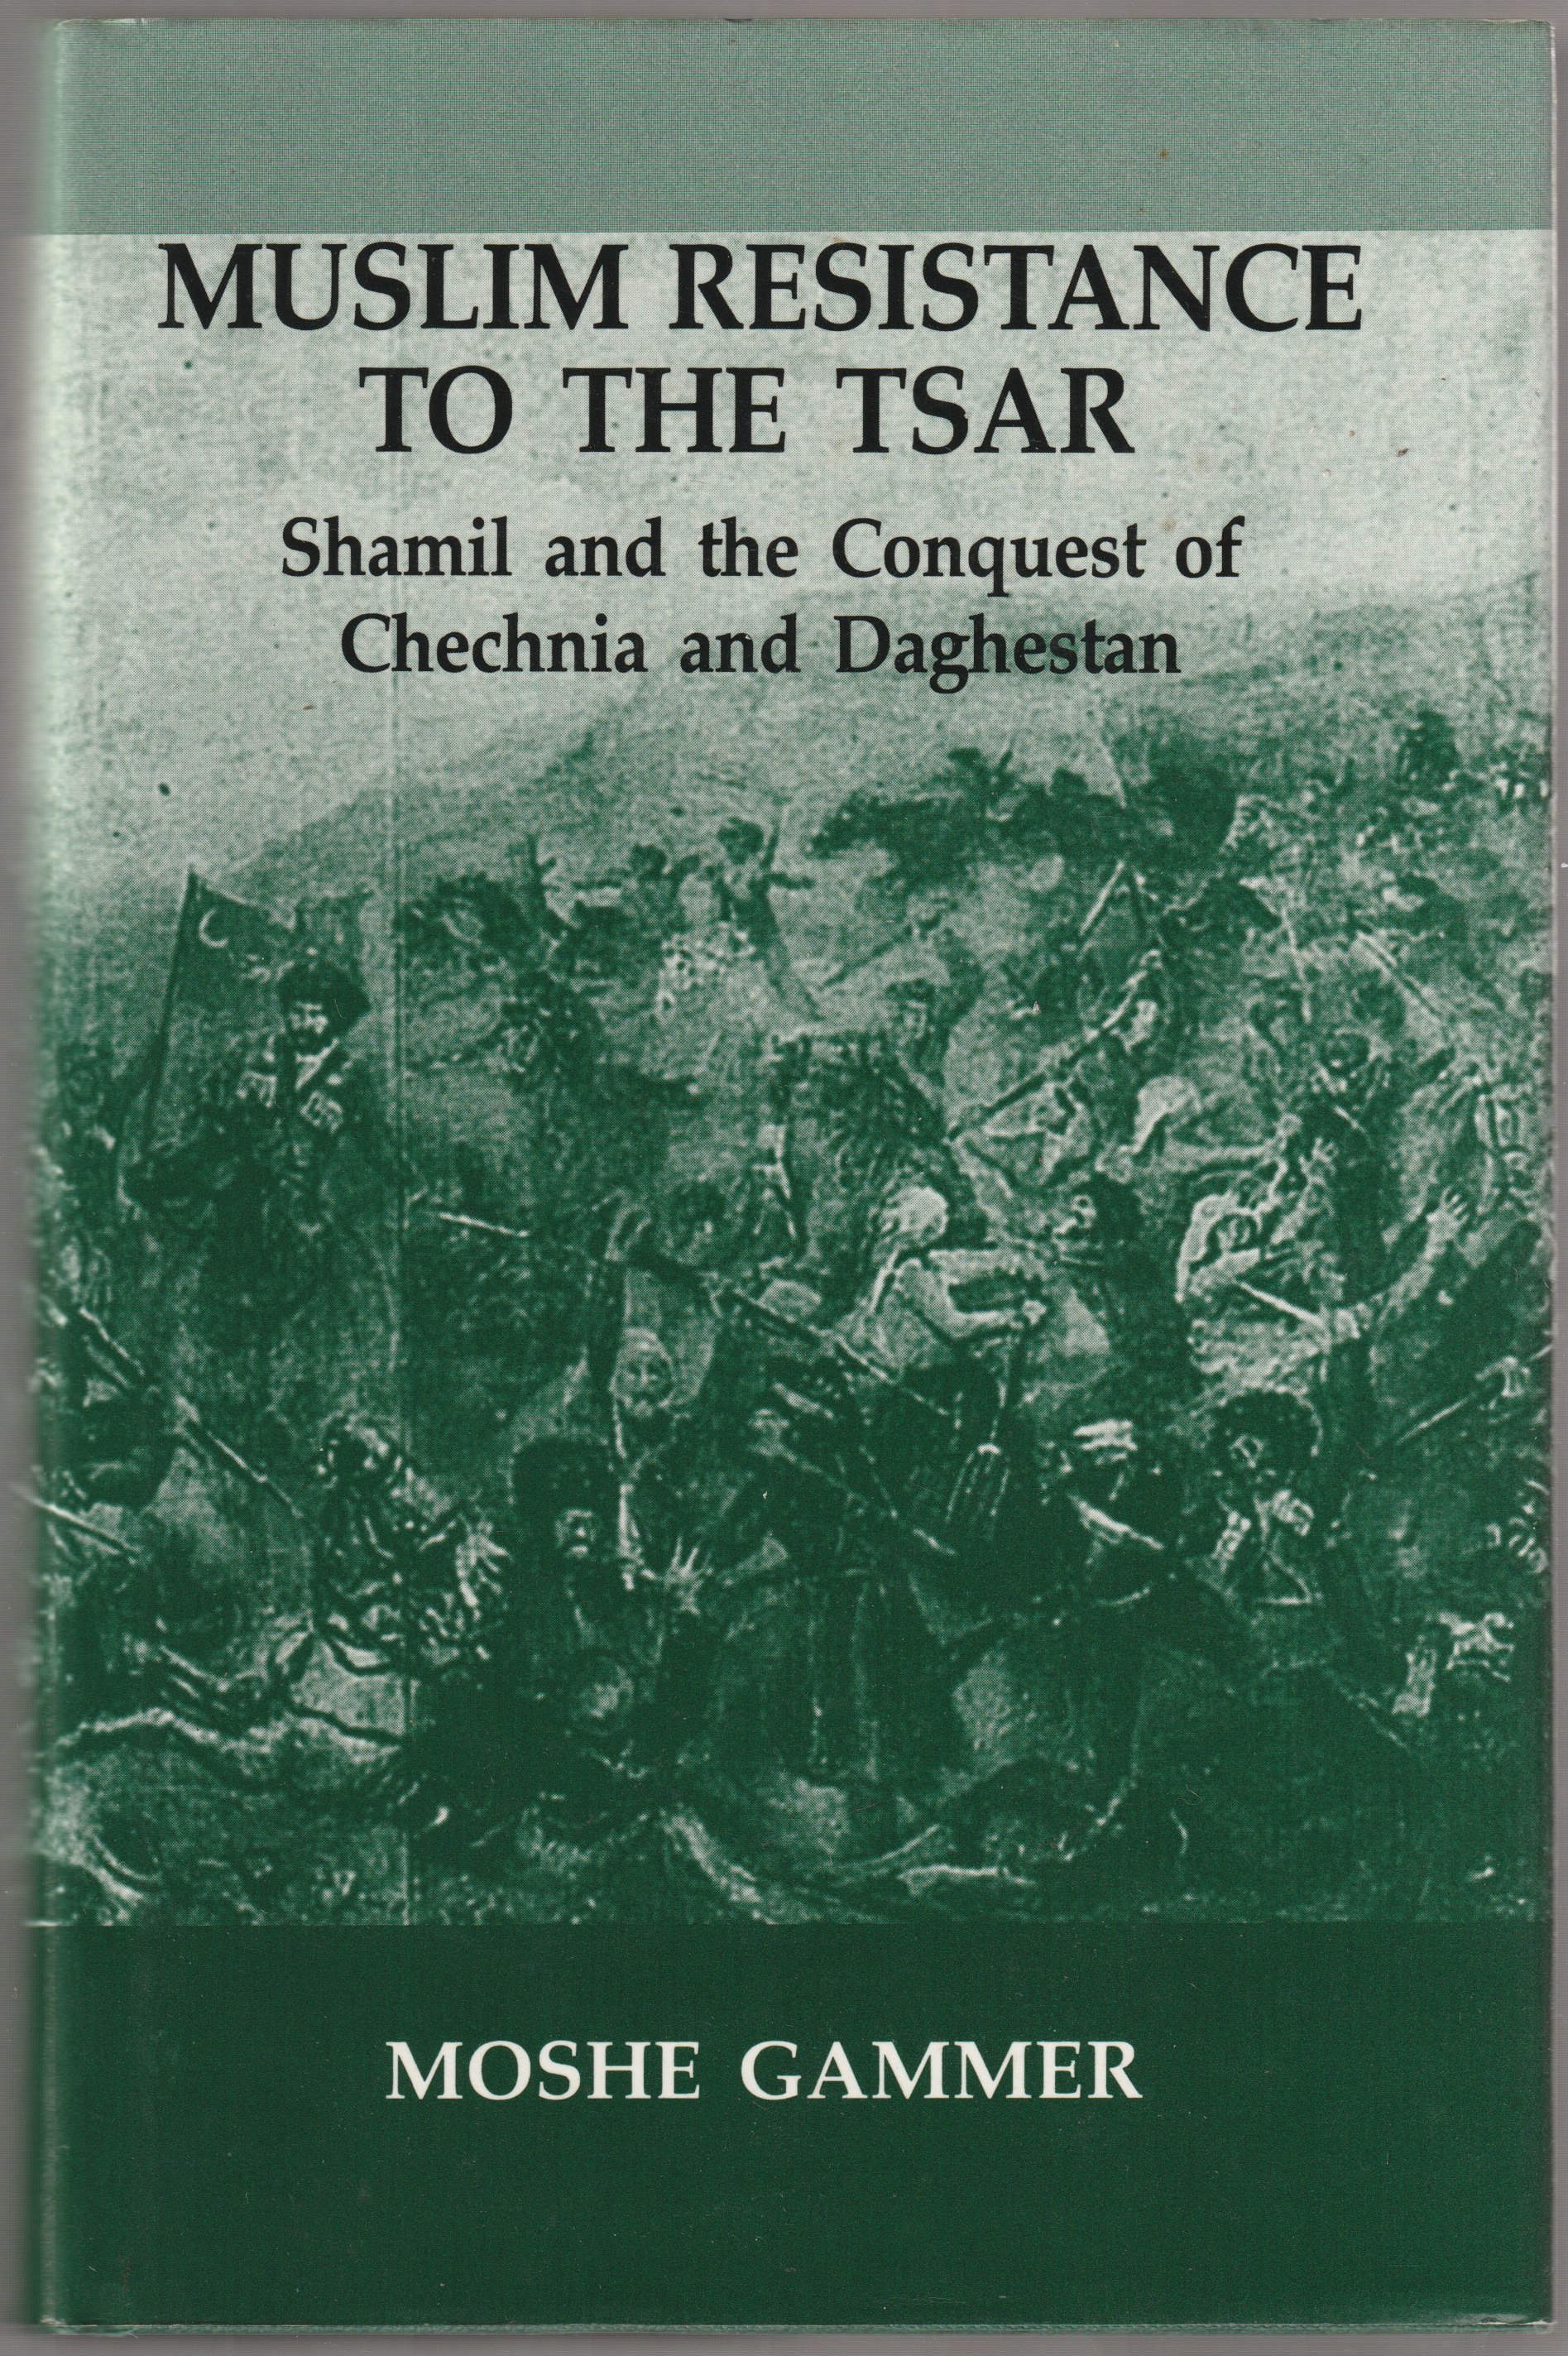 Muslim resistance to the tsar : Shamil and the conquest of Chechnia and Daghestan.